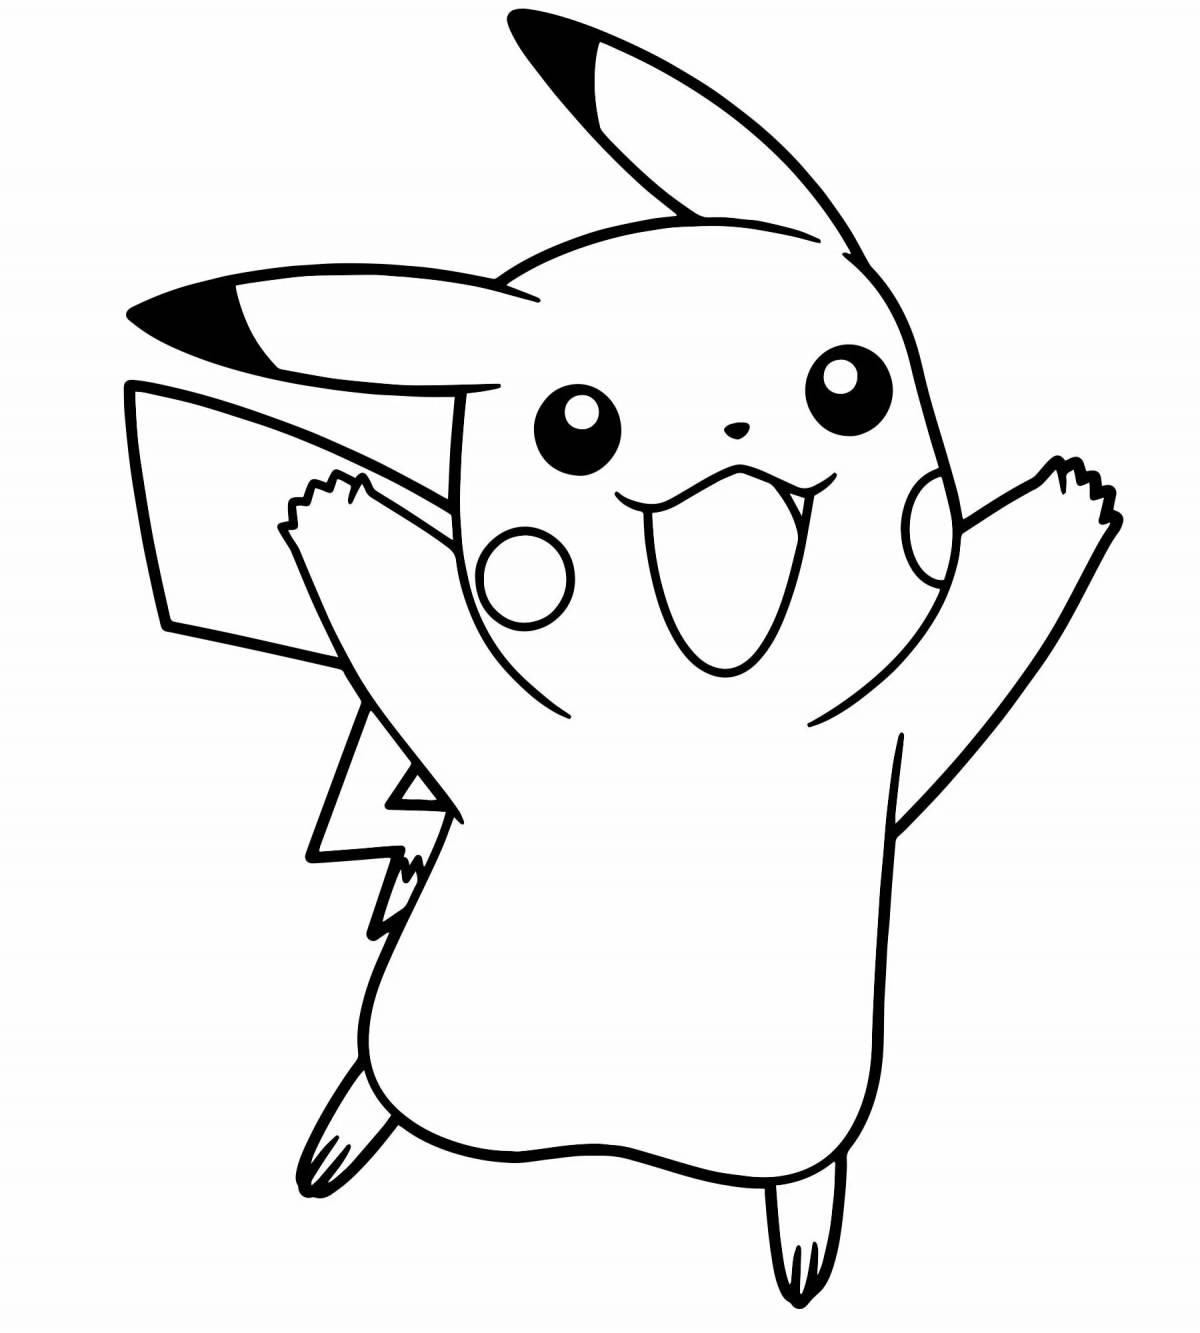 Pikachu fairy seal coloring page